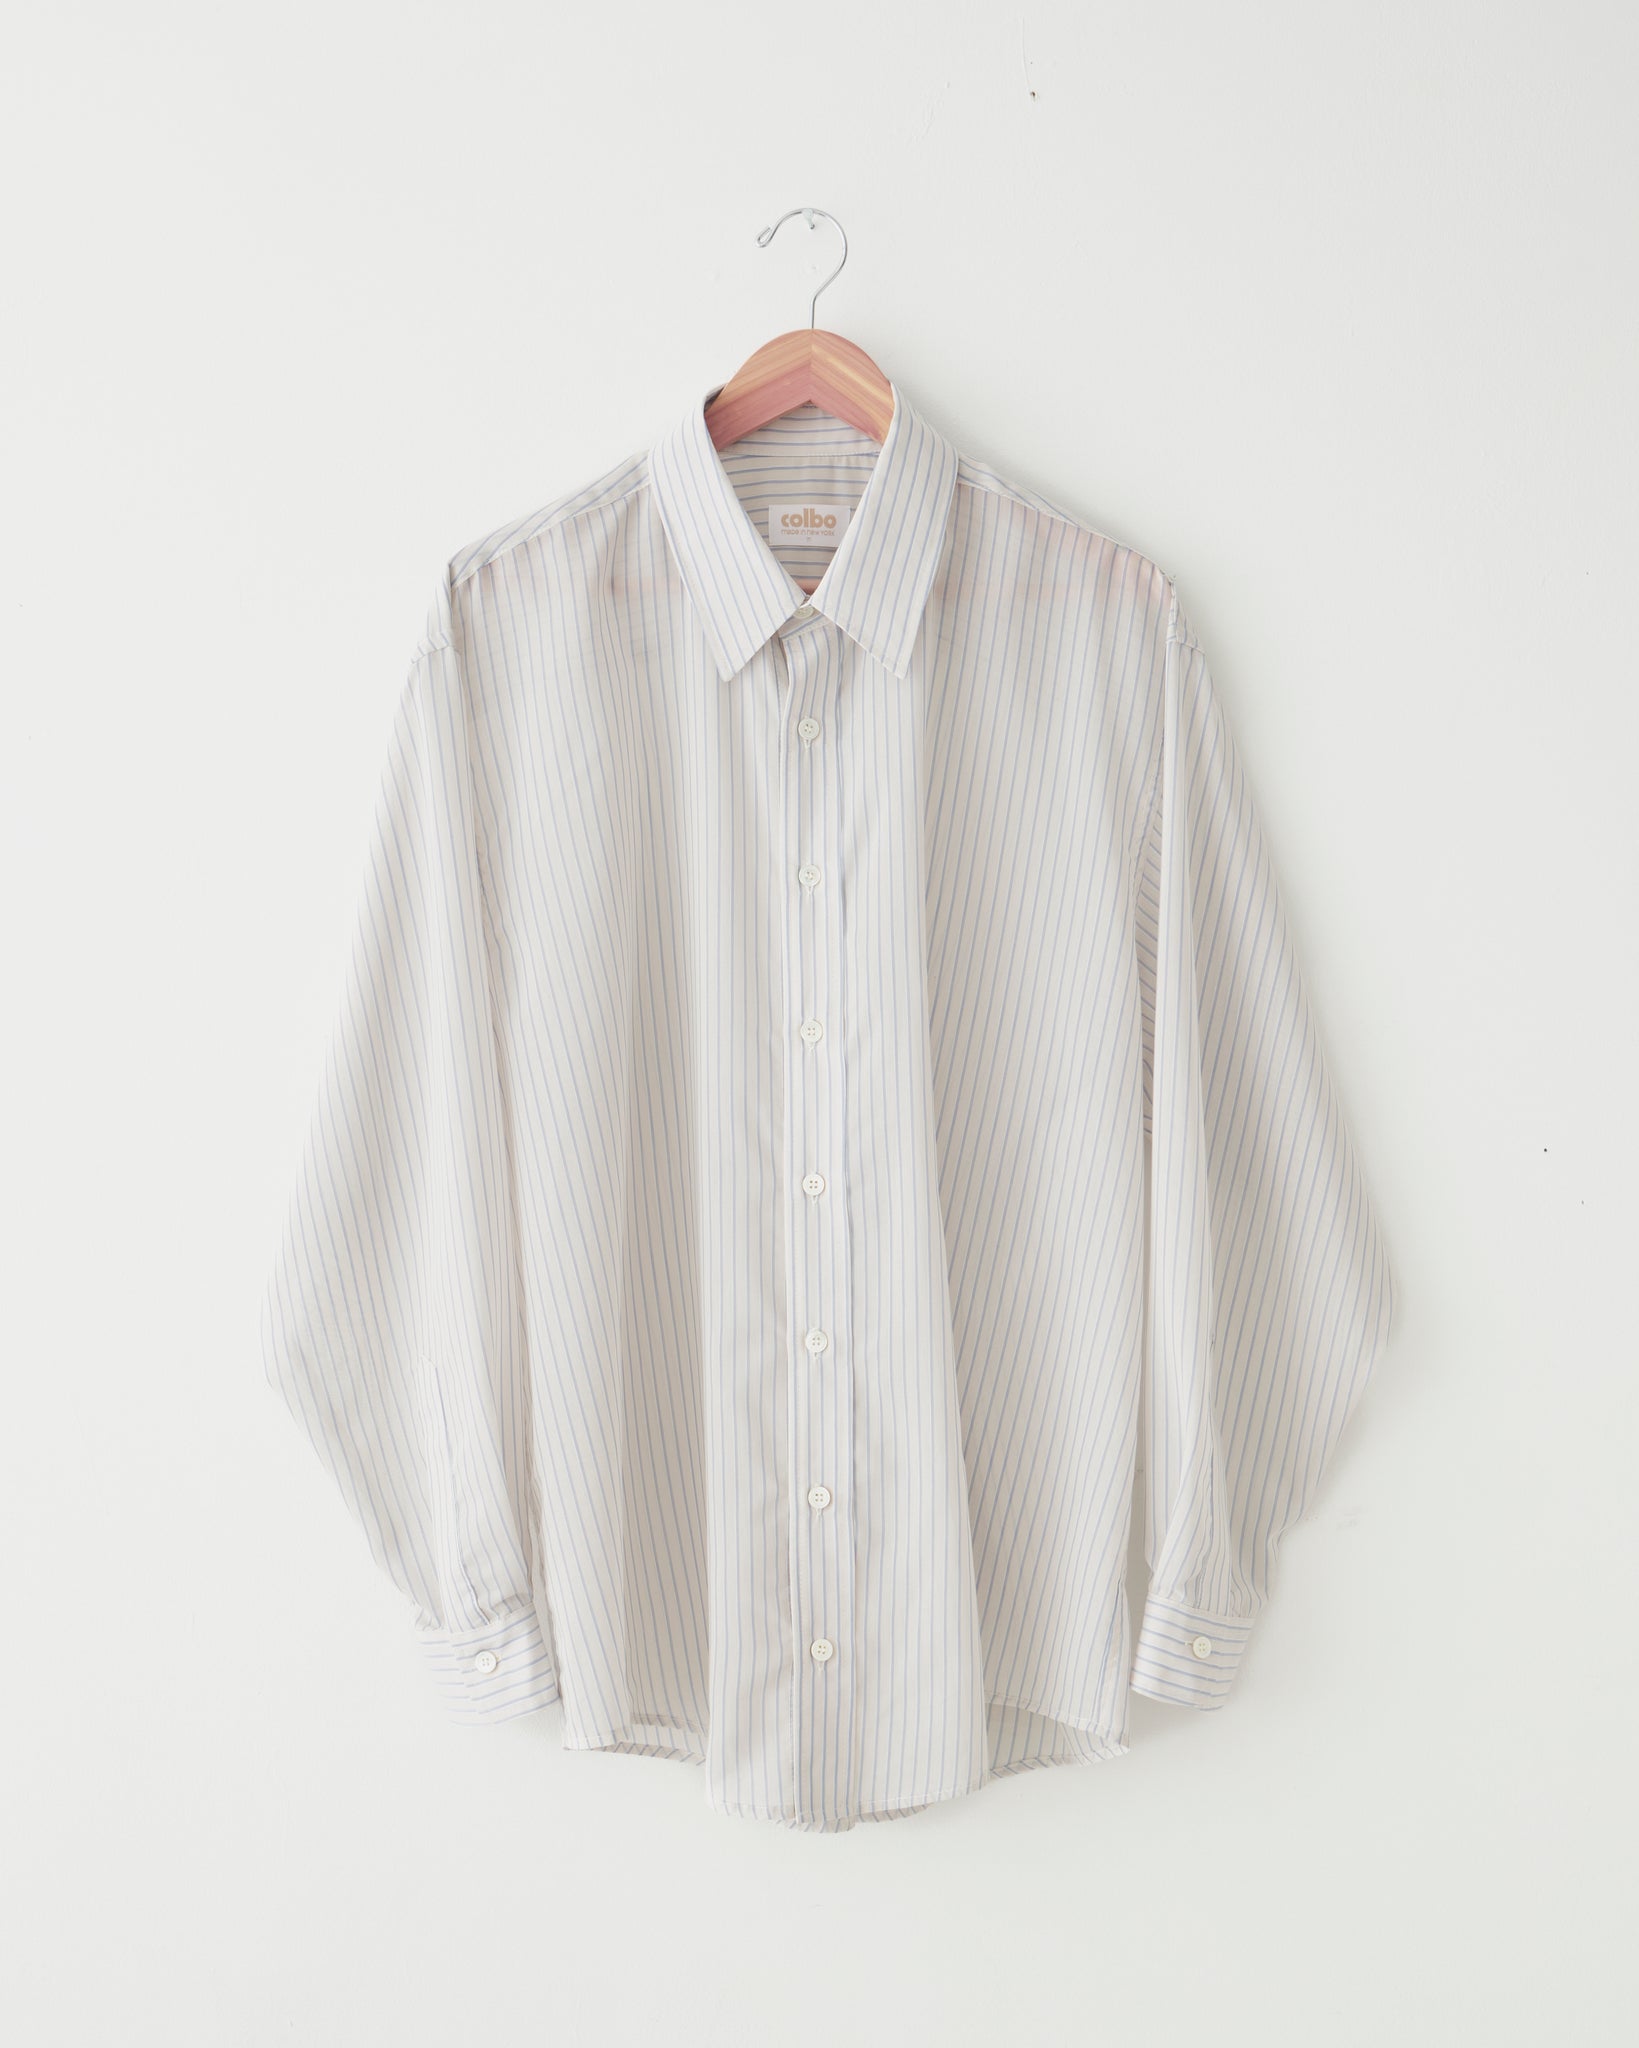 Office Shirt, White Striped